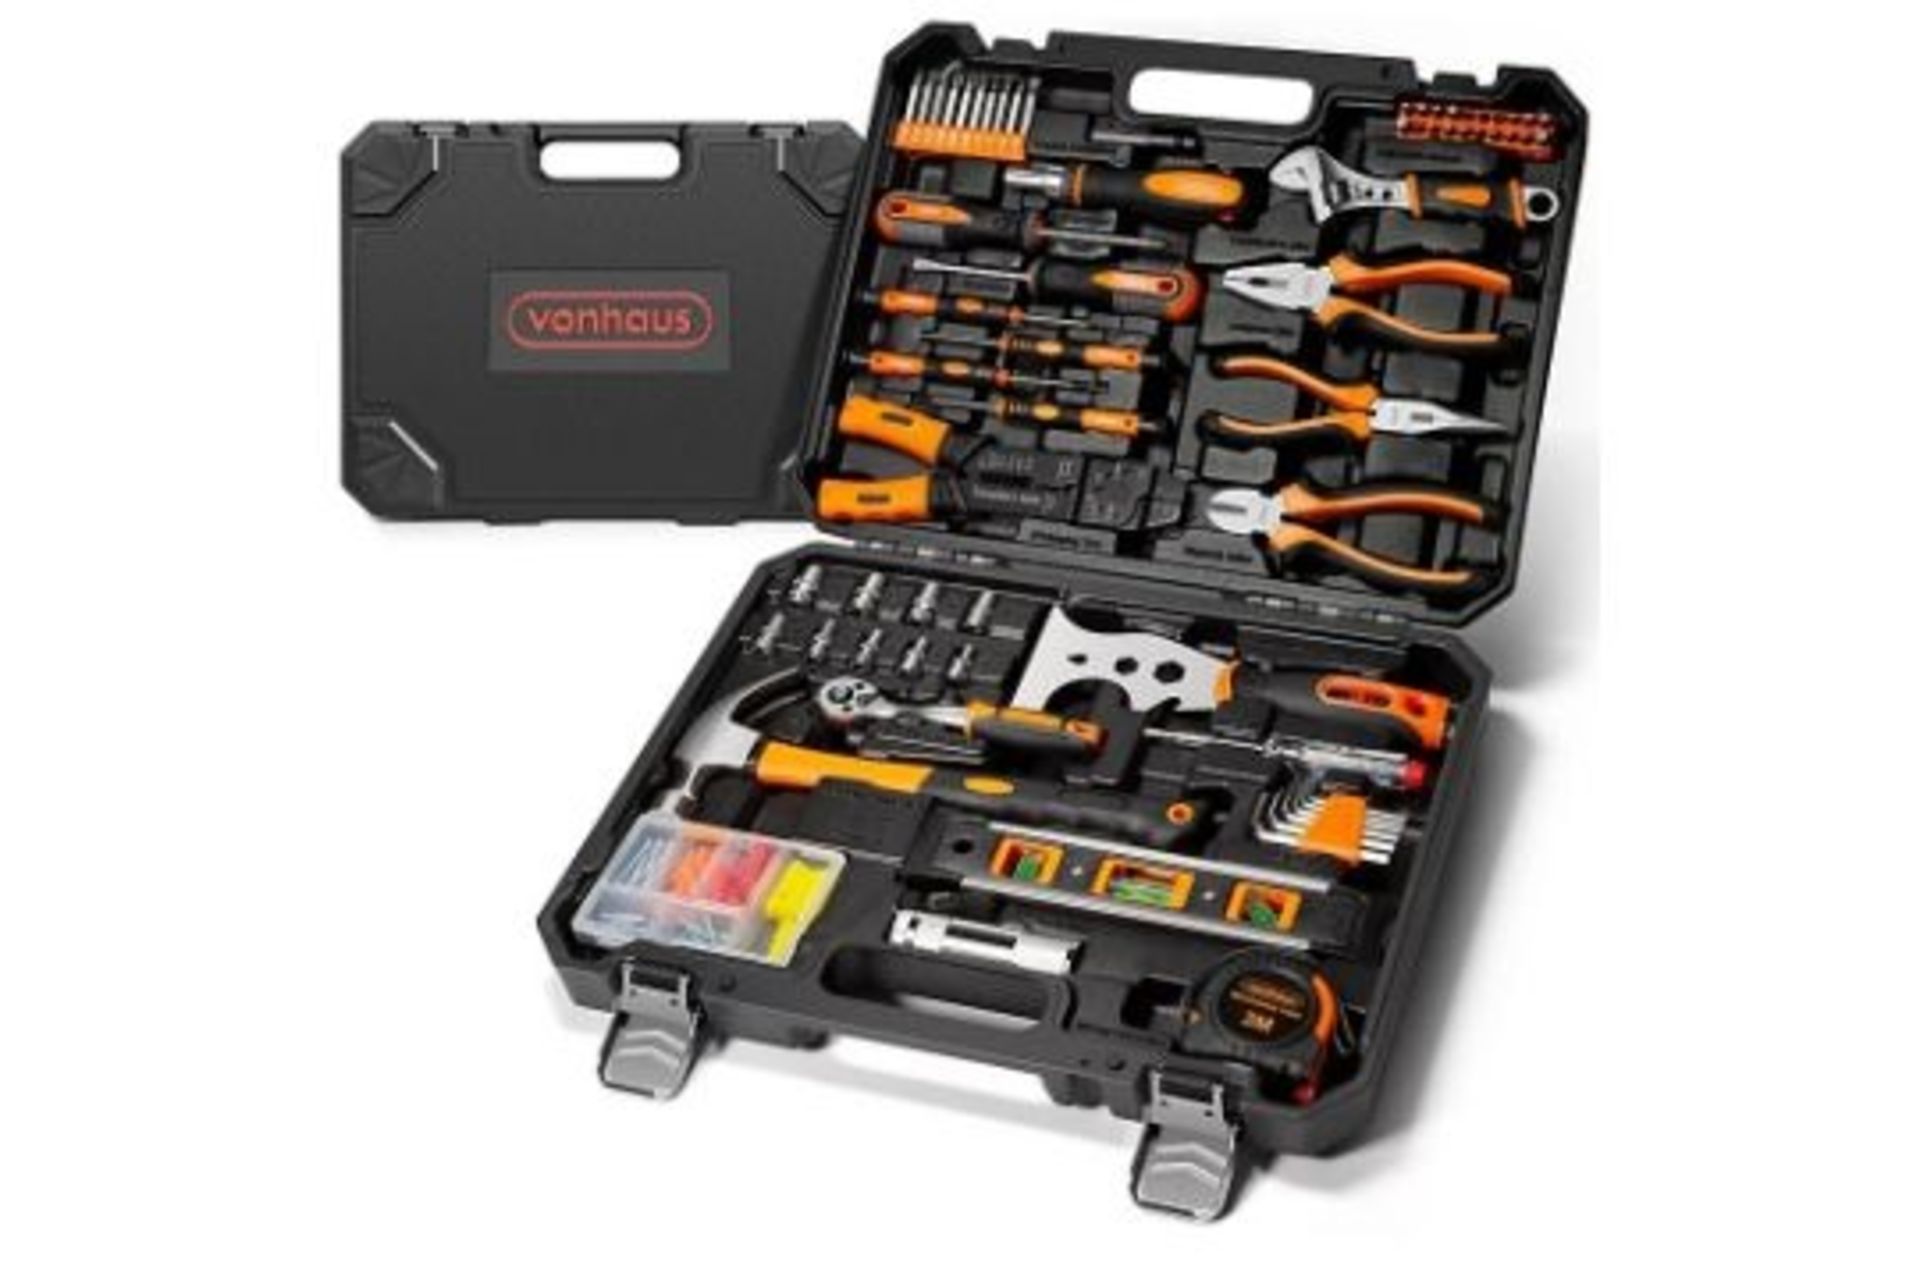 Tool Kit - Ultimate 120 pcs Tool Box for Beginners - Includes Hand Tools, LED Torch, Hex Keys, 3m